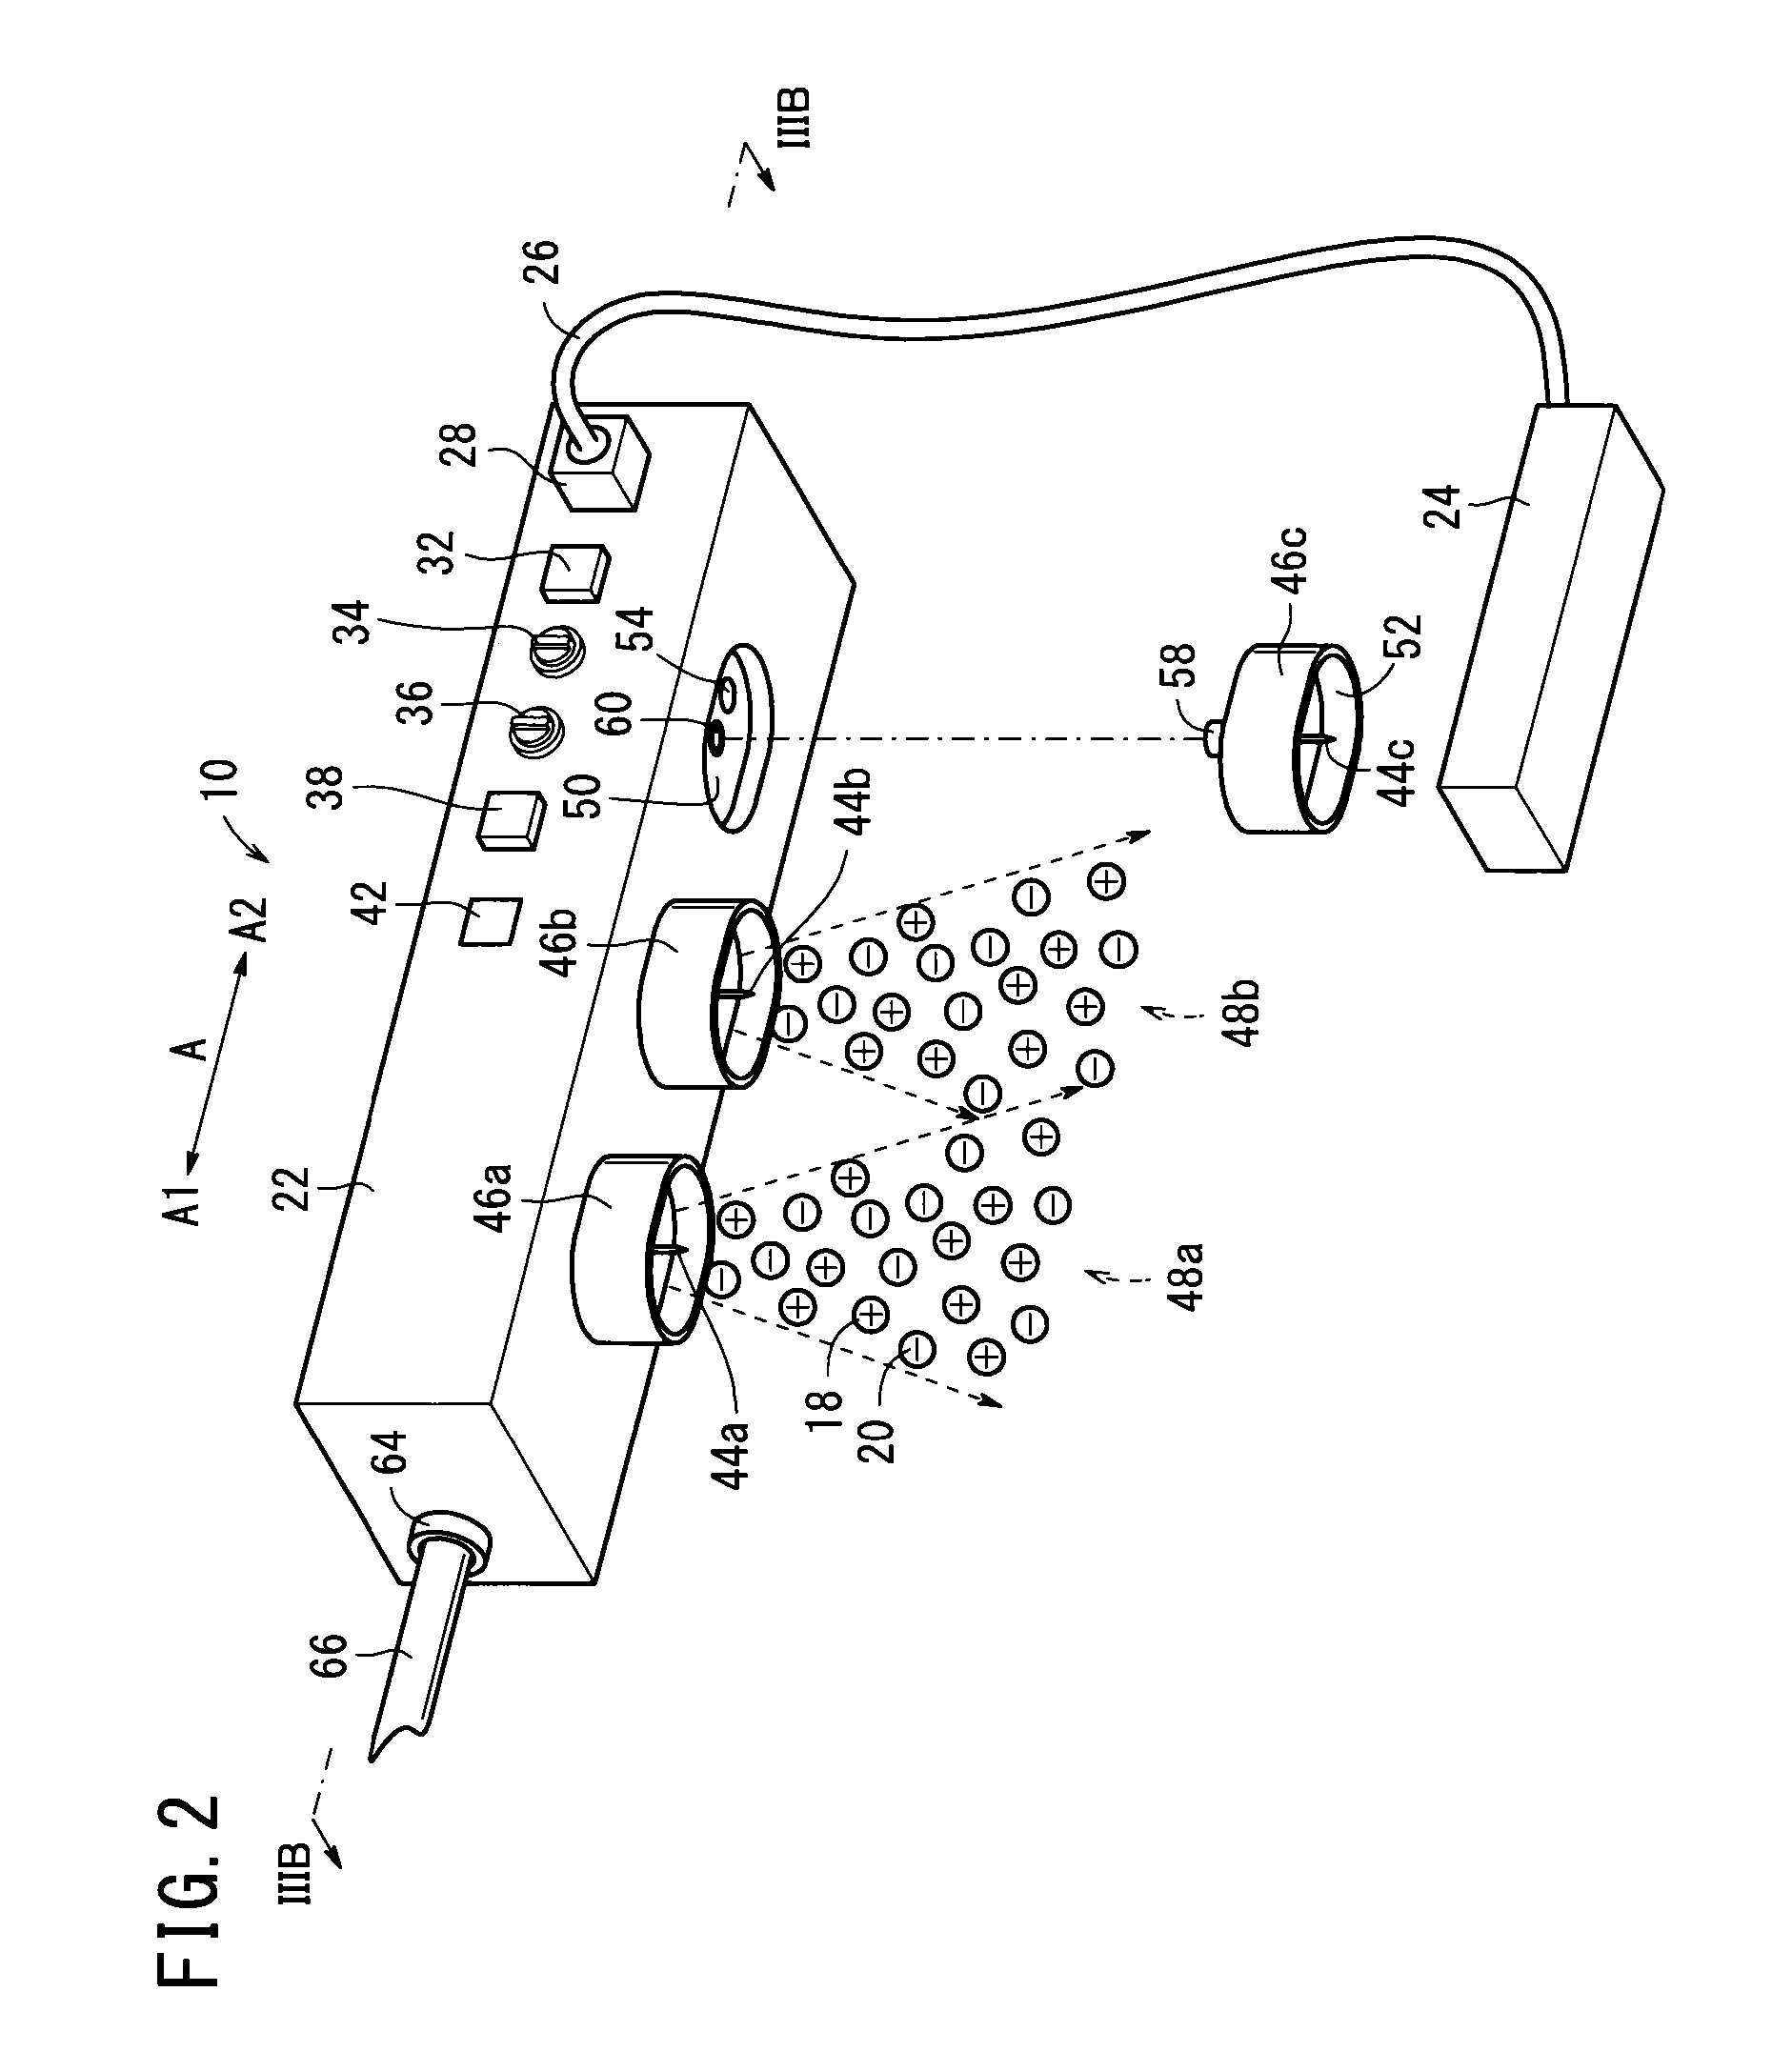 Electric charge generating device